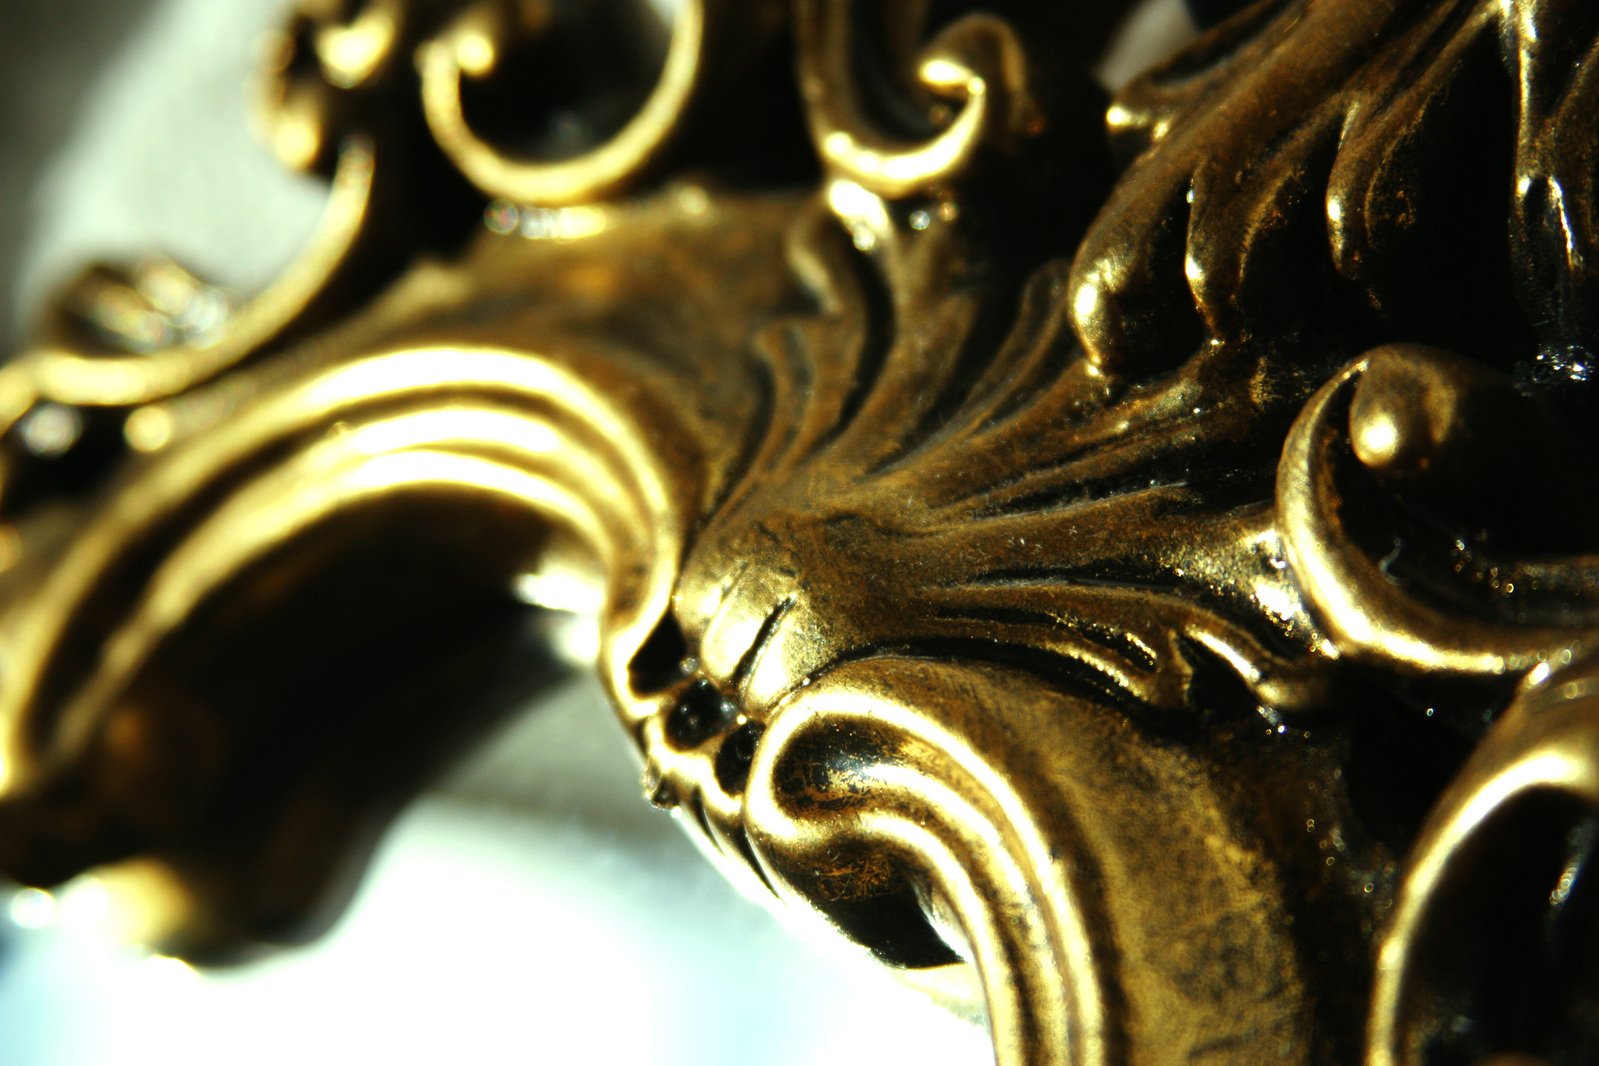 a close - up s of a gold decorative object